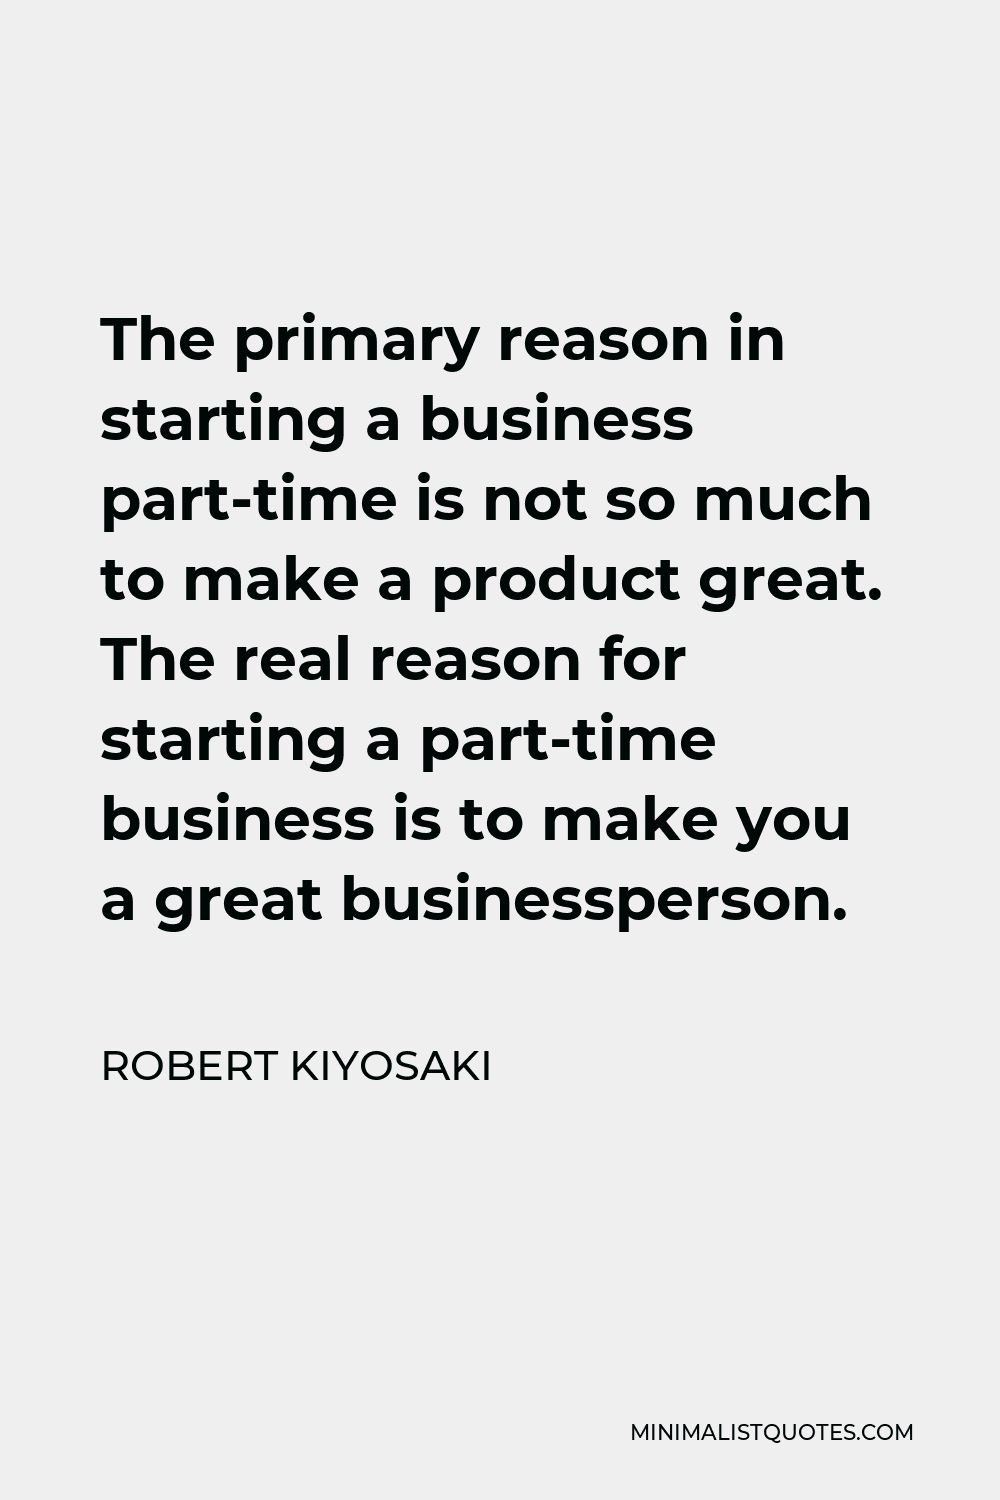 Robert Kiyosaki Quote - The primary reason in starting a business part-time is not so much to make a product great. The real reason for starting a part-time business is to make you a great businessperson.